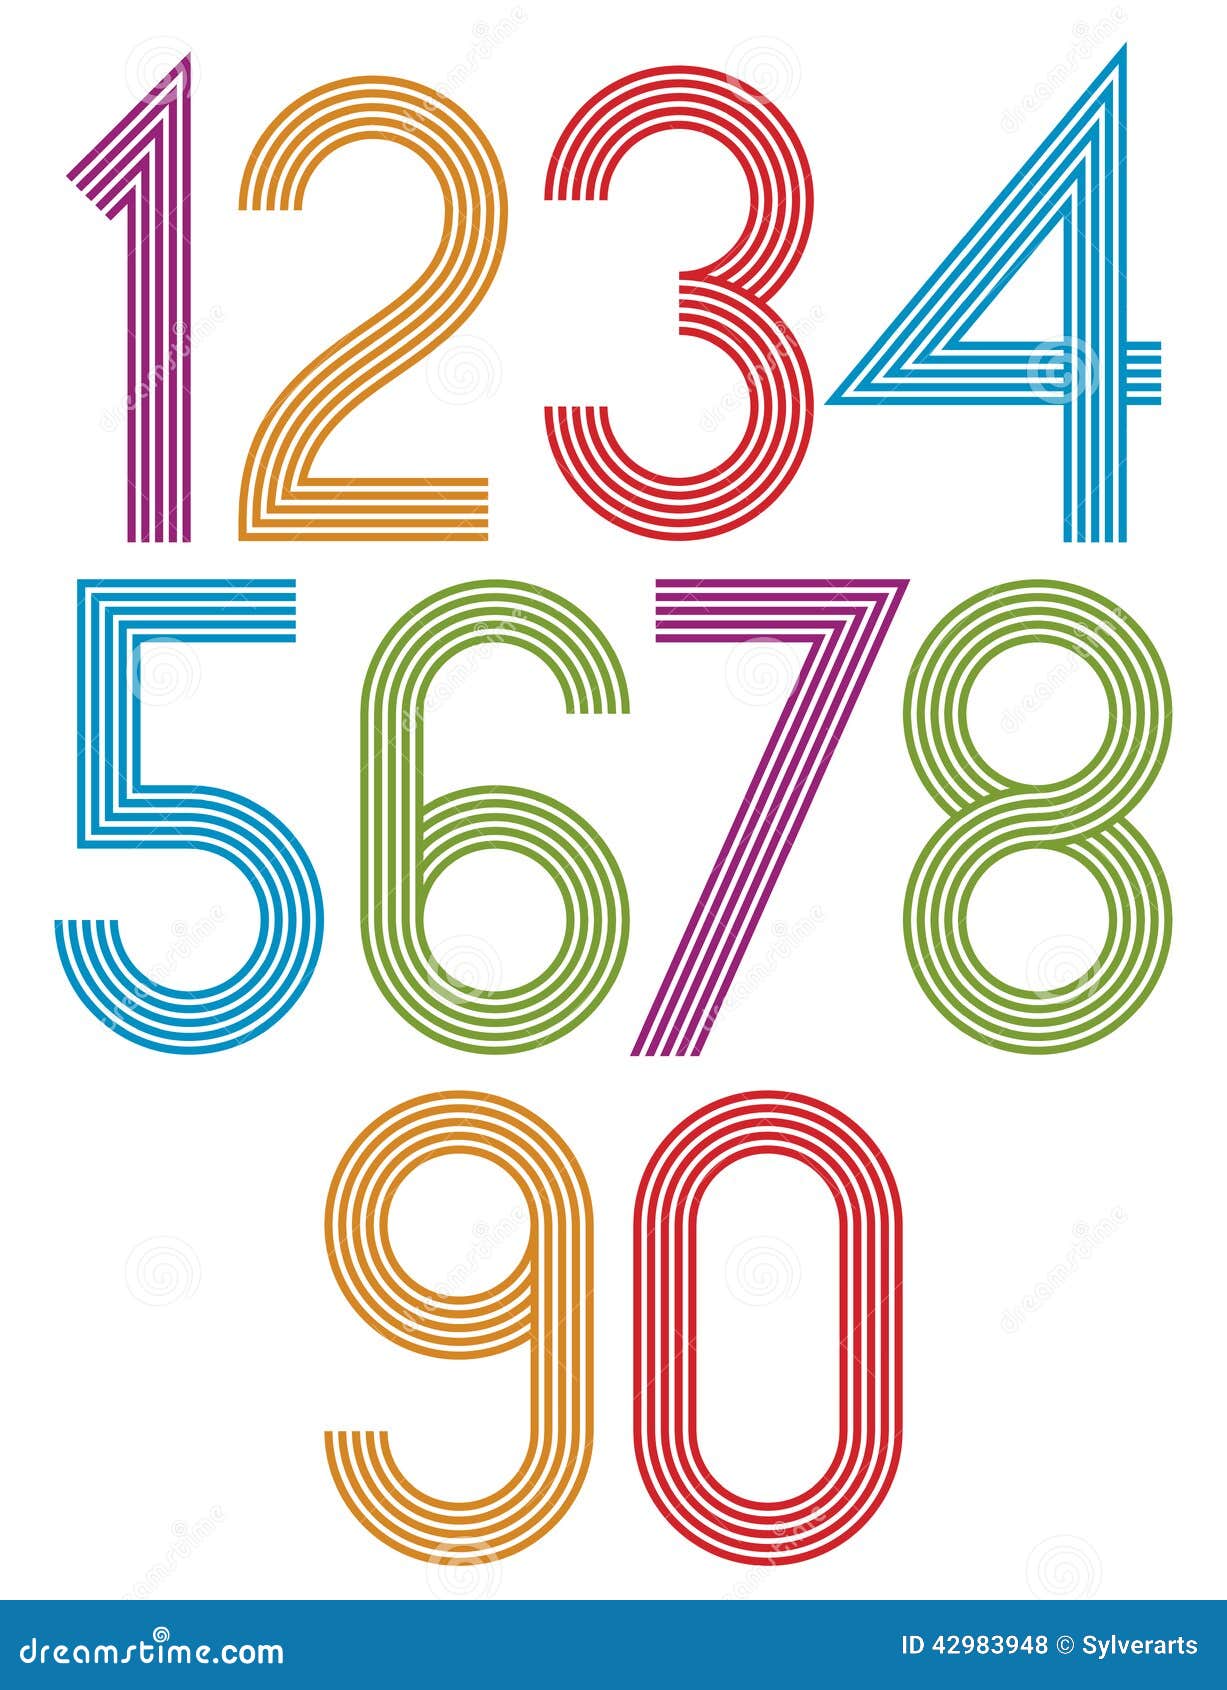 Download Retro Stripes Funky Numbers Set. Stock Vector ...